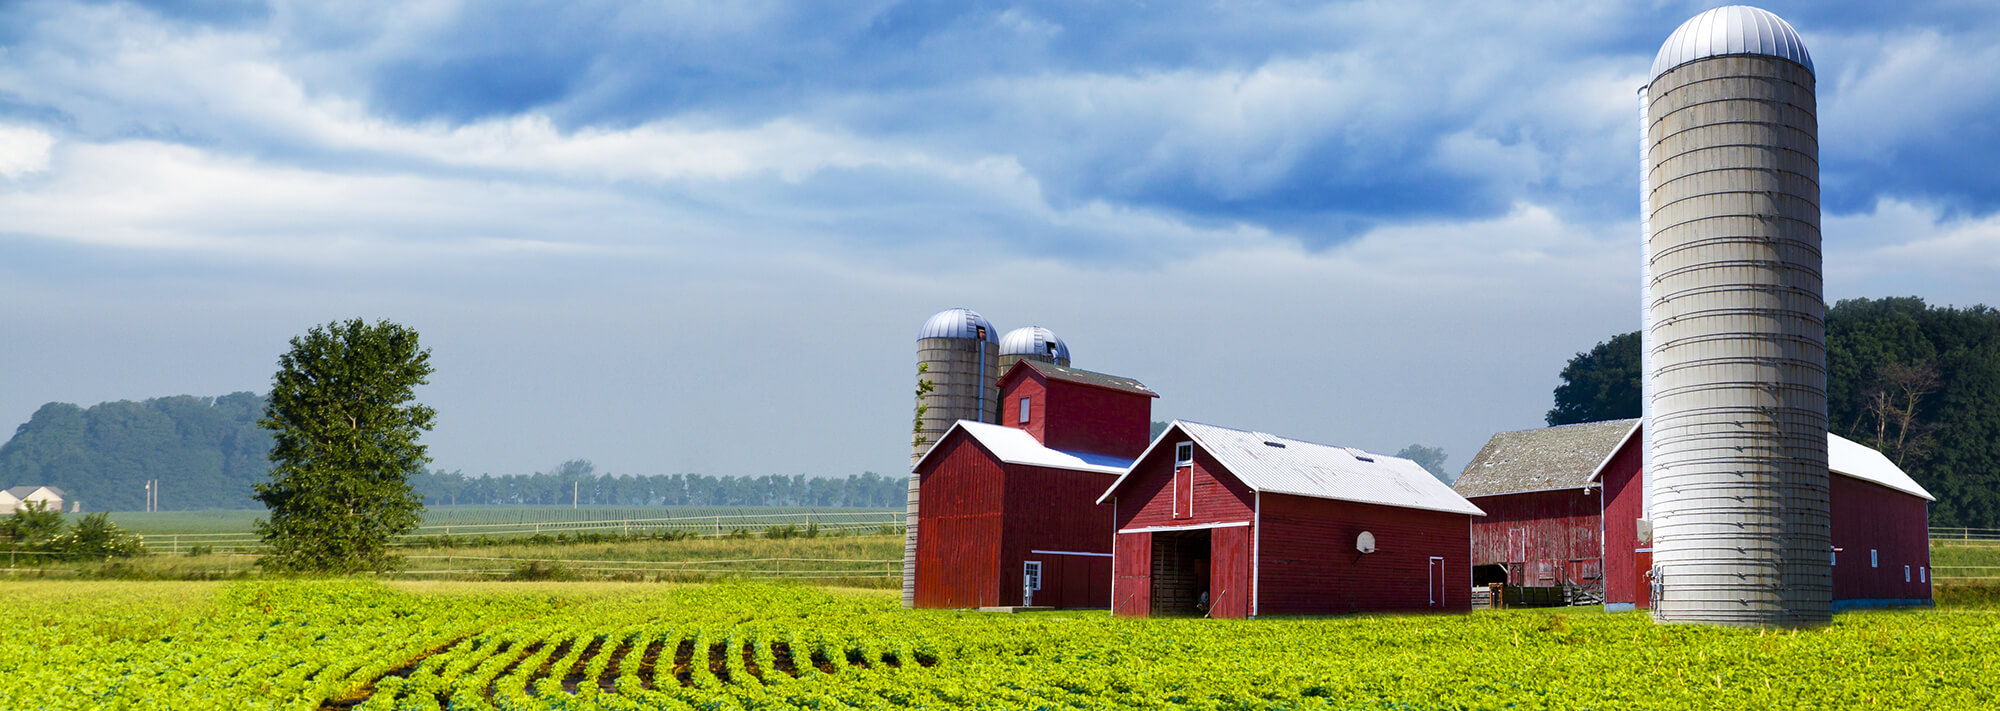 Rural family farm in central Minnesota with a red barn, red outbuildings, and multiple silos